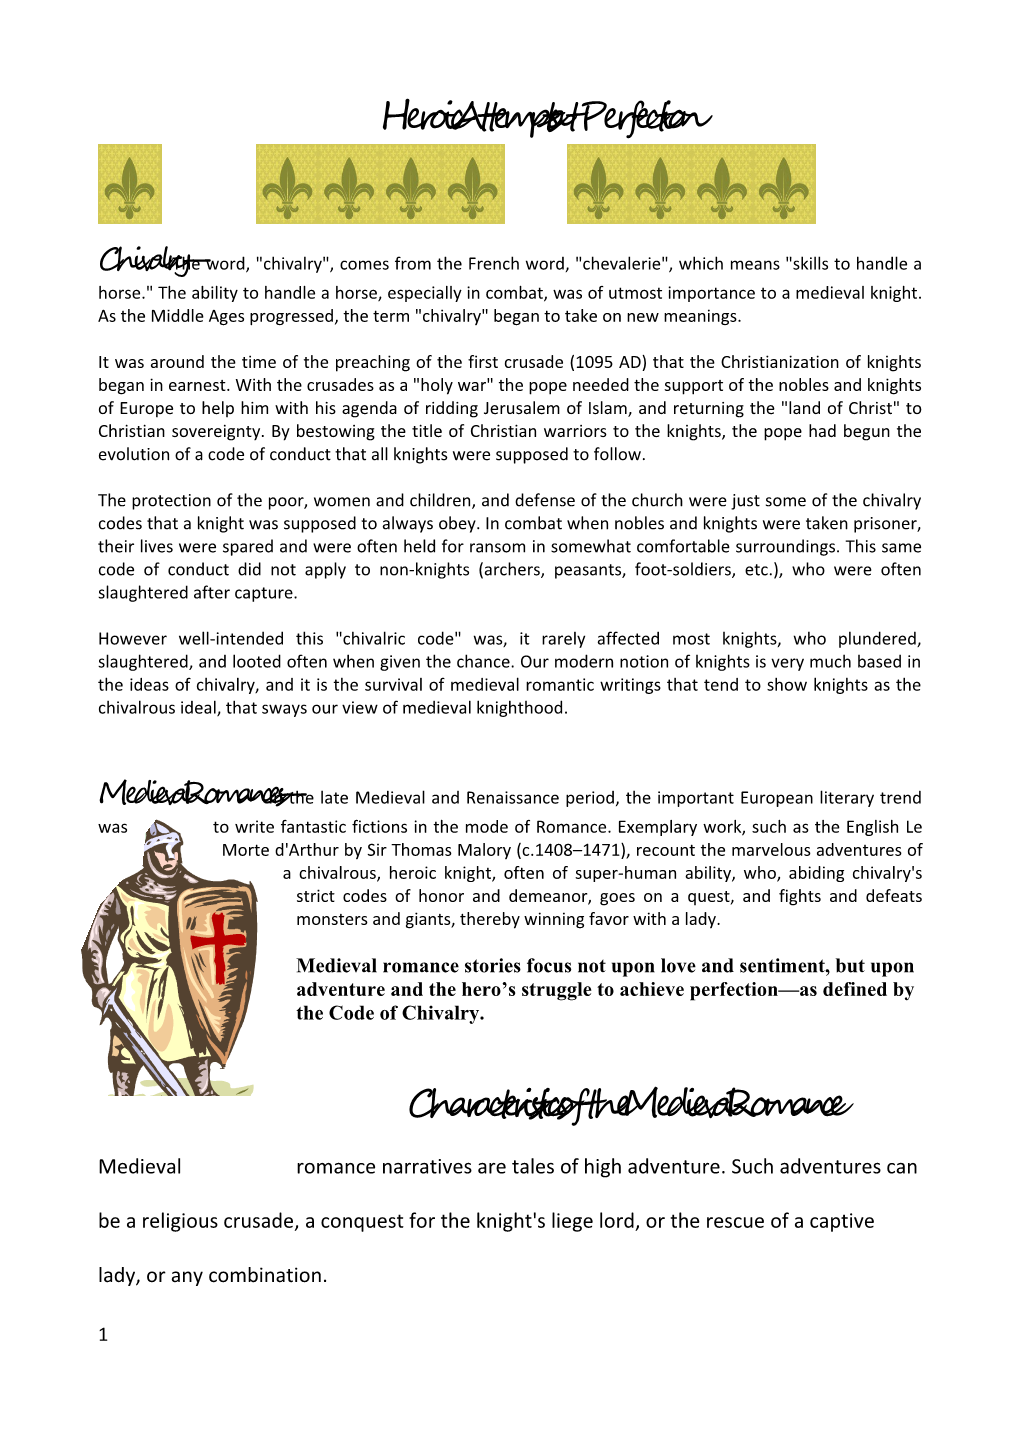 Chivalric Code of Conduct